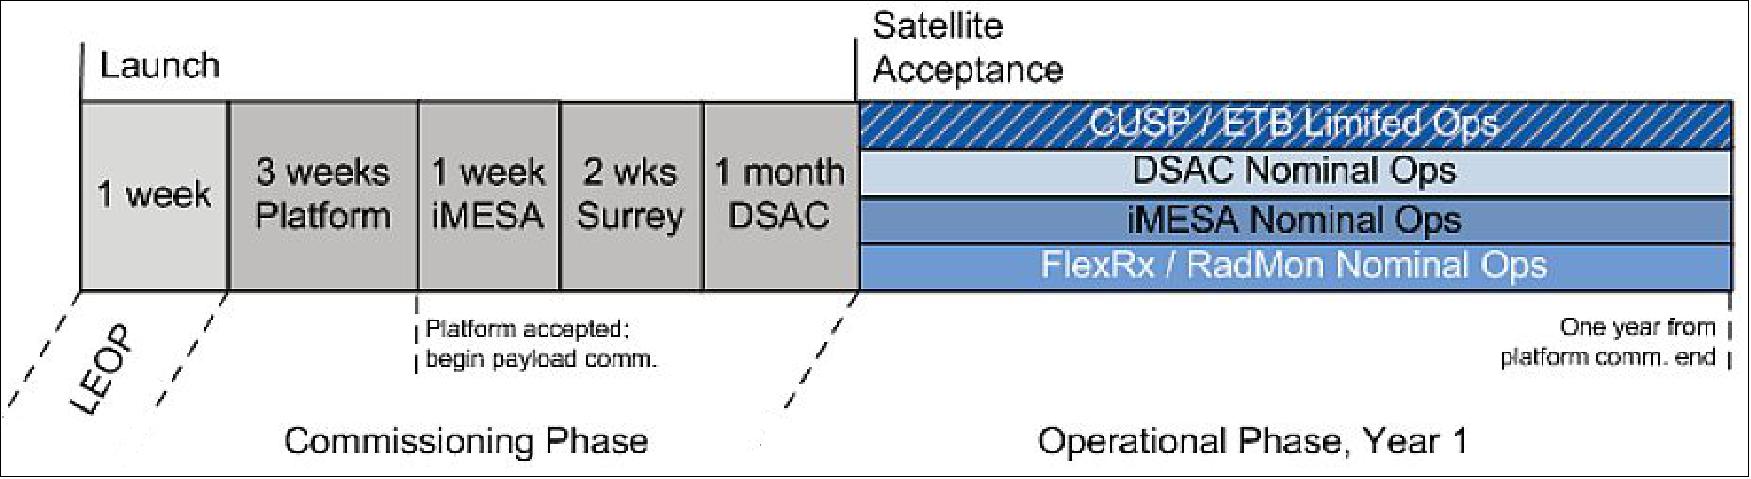 Figure 31: Overview of the planned on-orbit phases (image credit: SST-US, Ref. 7)